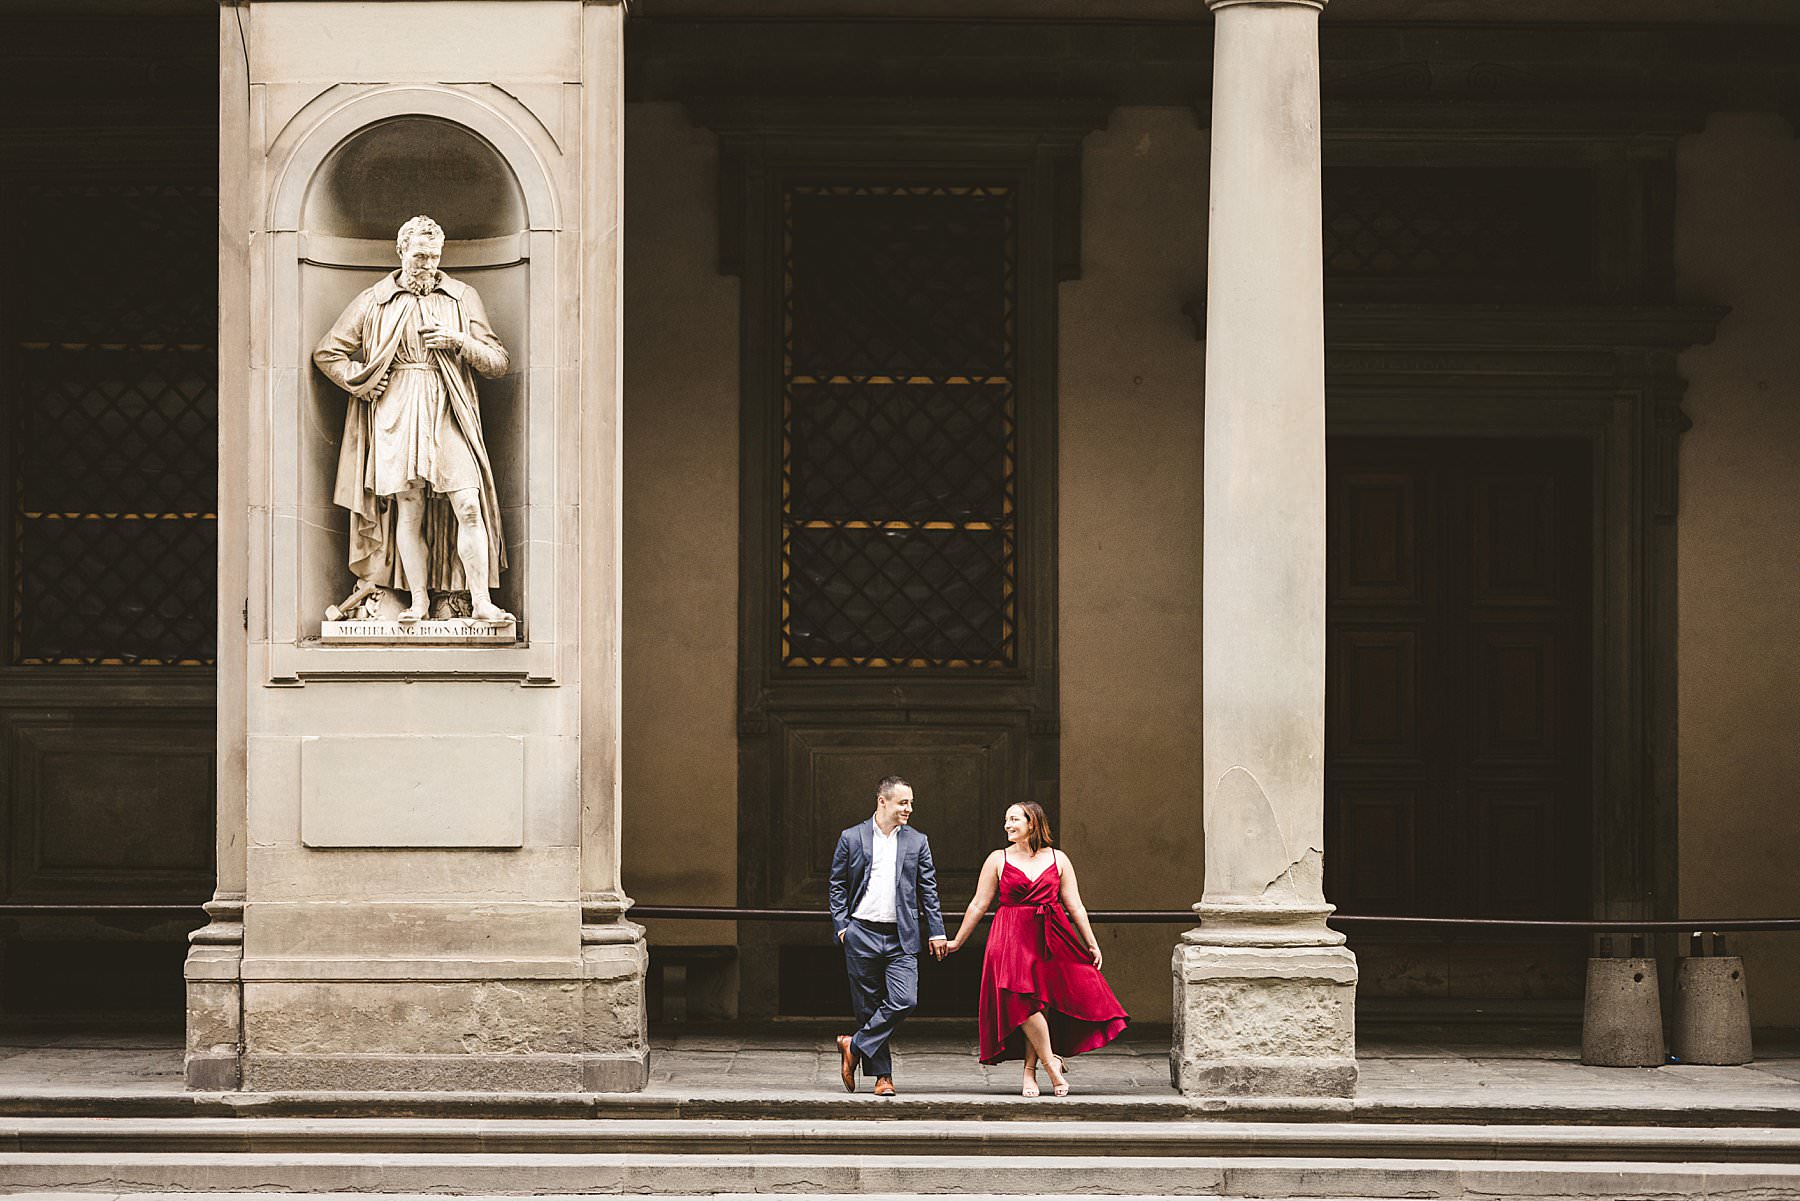 Exciting couple portrait pre-wedding photo shoot in the Uffizi Art Gallery located in the heart of Florence, Tuscany